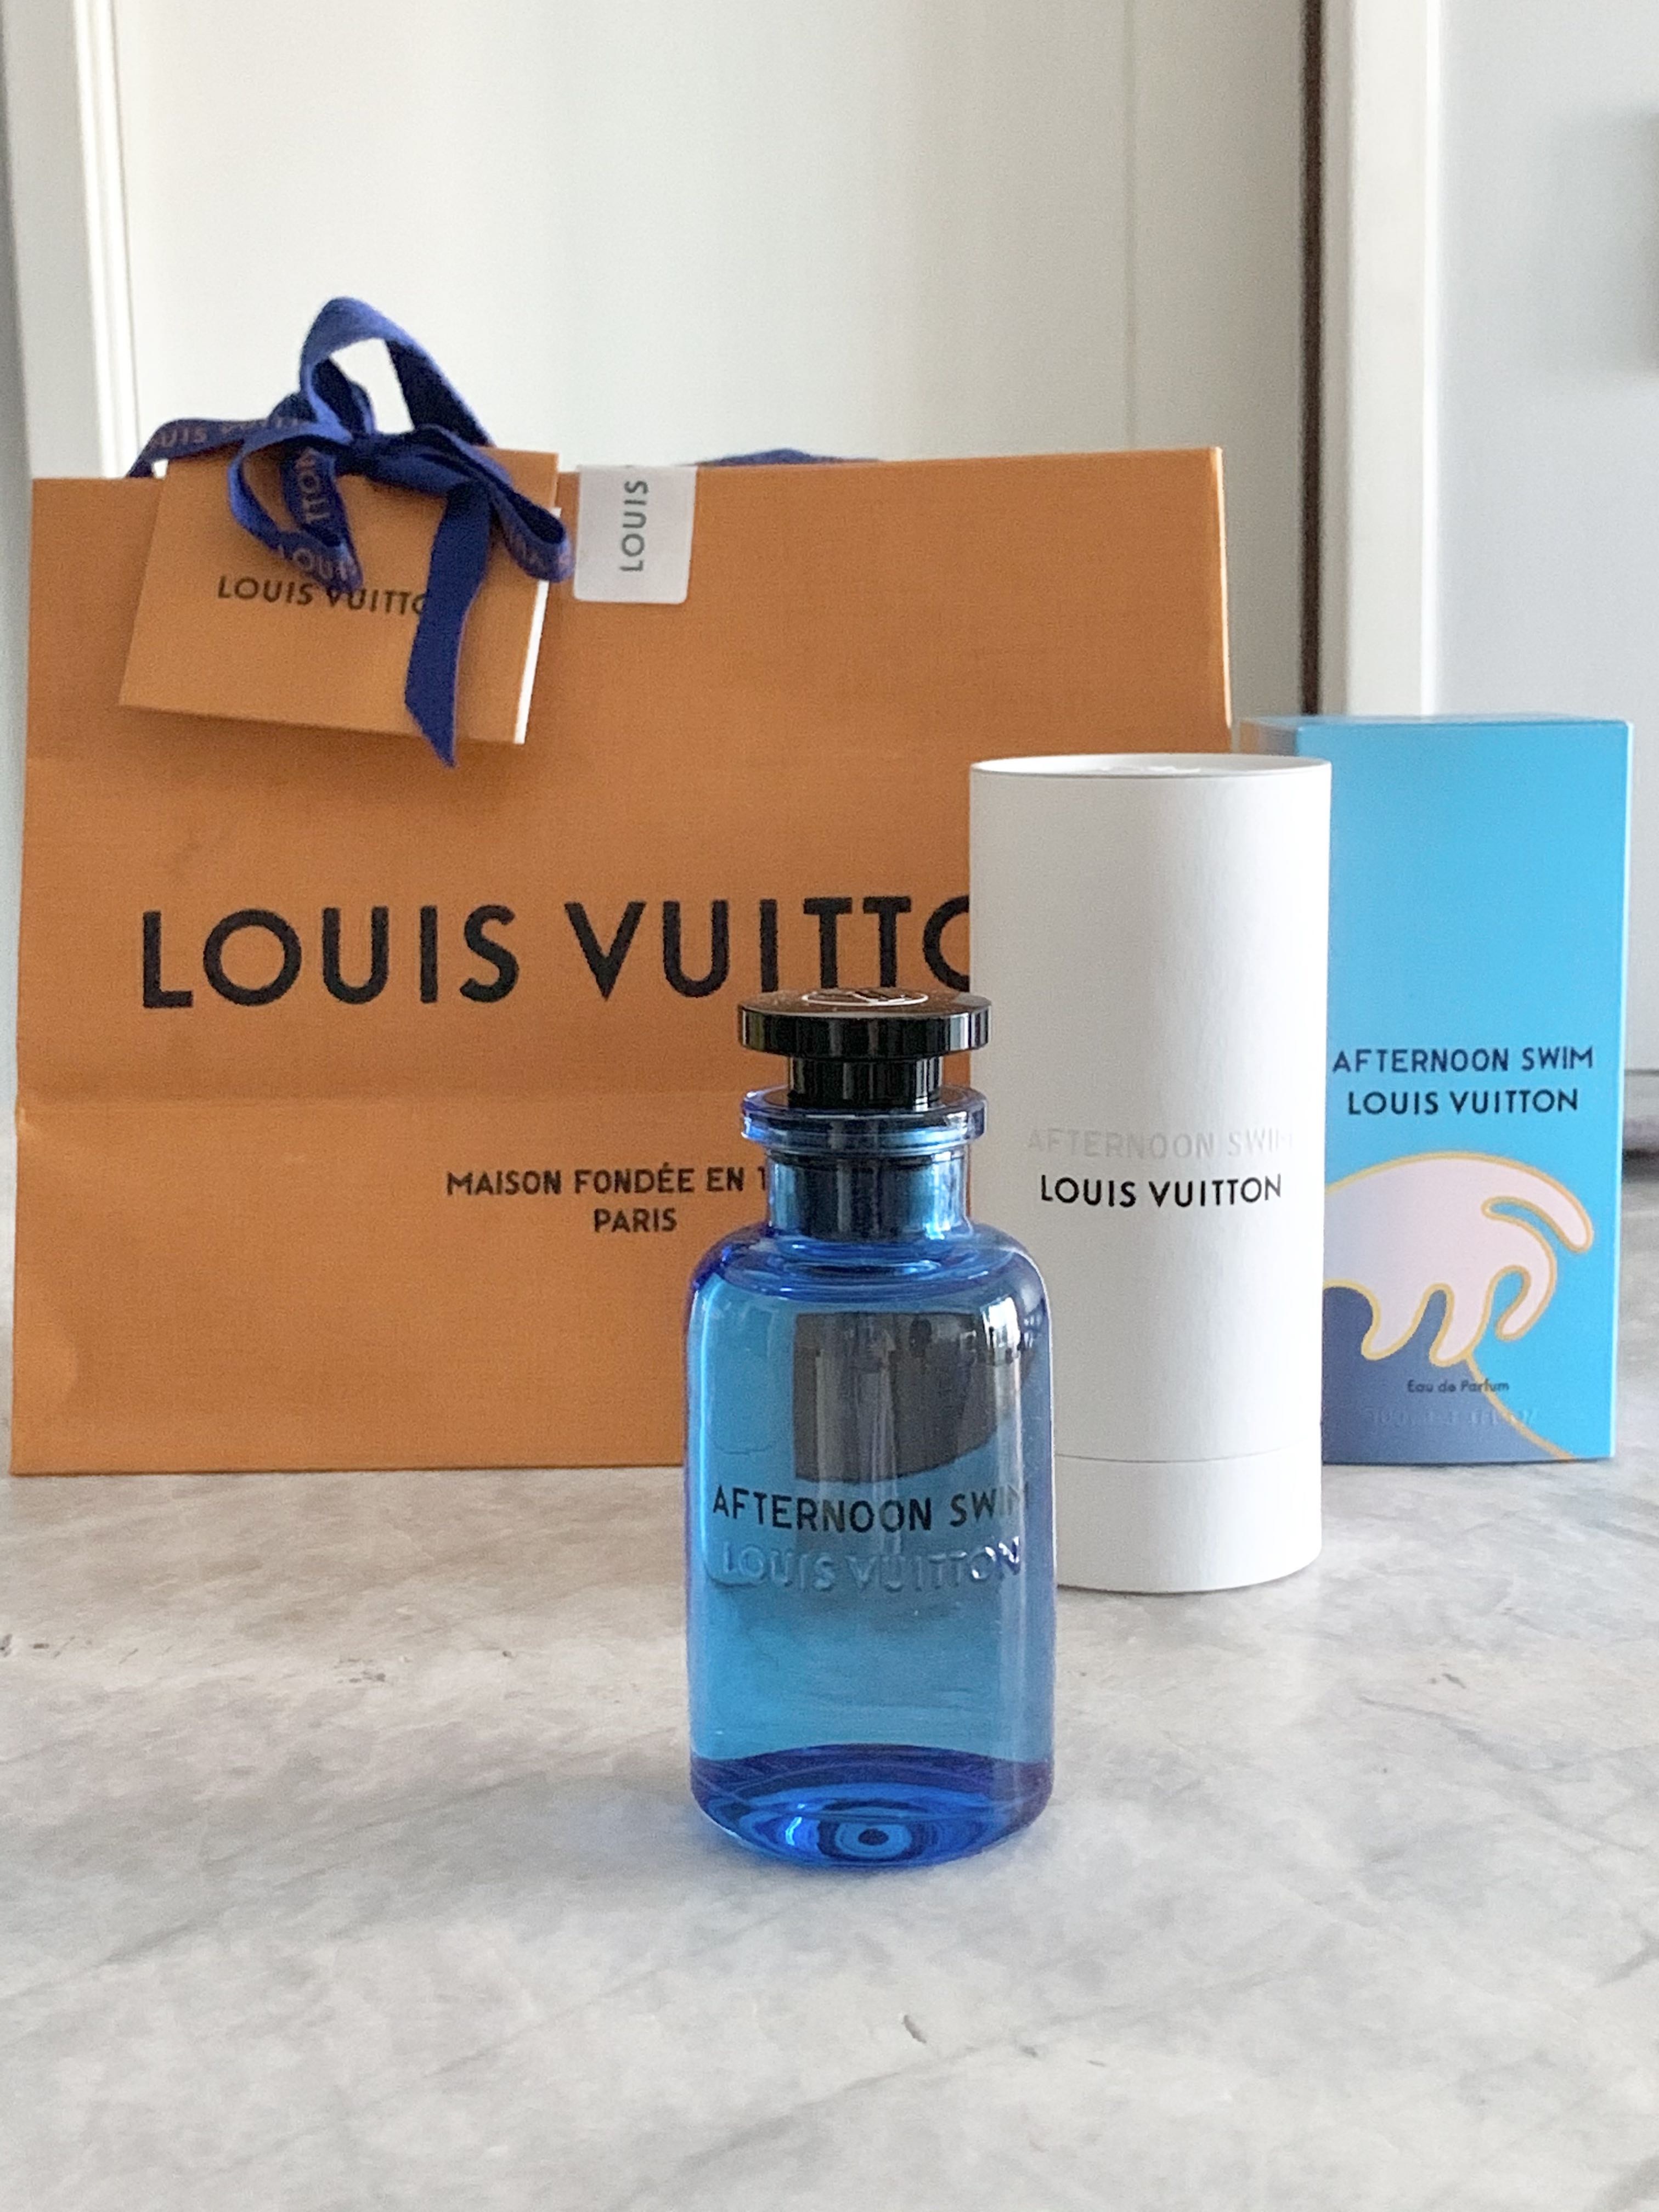 LOUIS VUITTON fragrance review AFTERNOON SWIM - LV perfume 